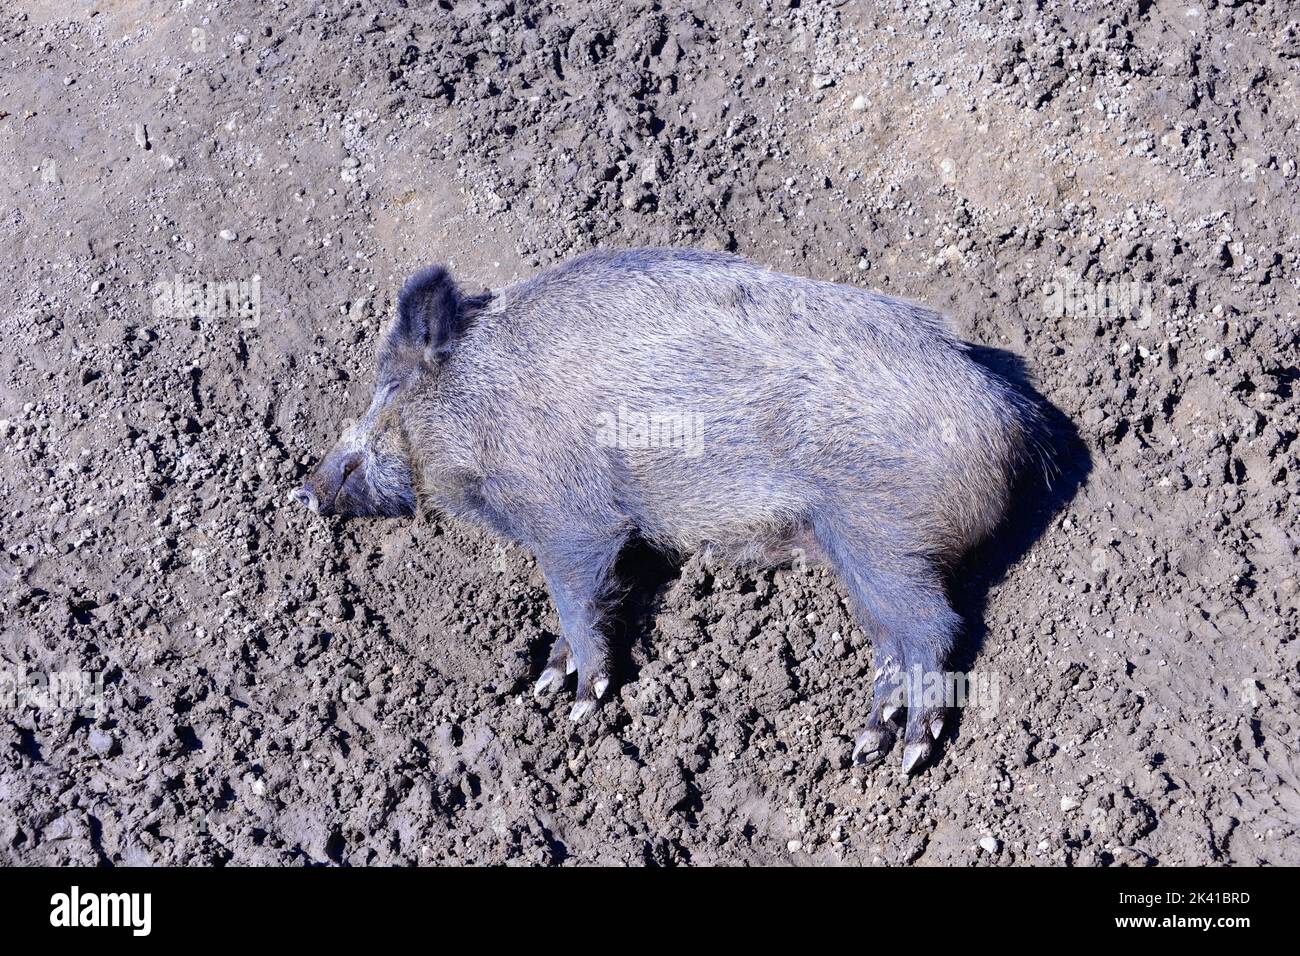 Big fat animal is sleeping on the sand. Enormous thick pig is relaxing. Very lazy, cute and beautiful wild pig is taking a nap. Animal obesity Stock Photo